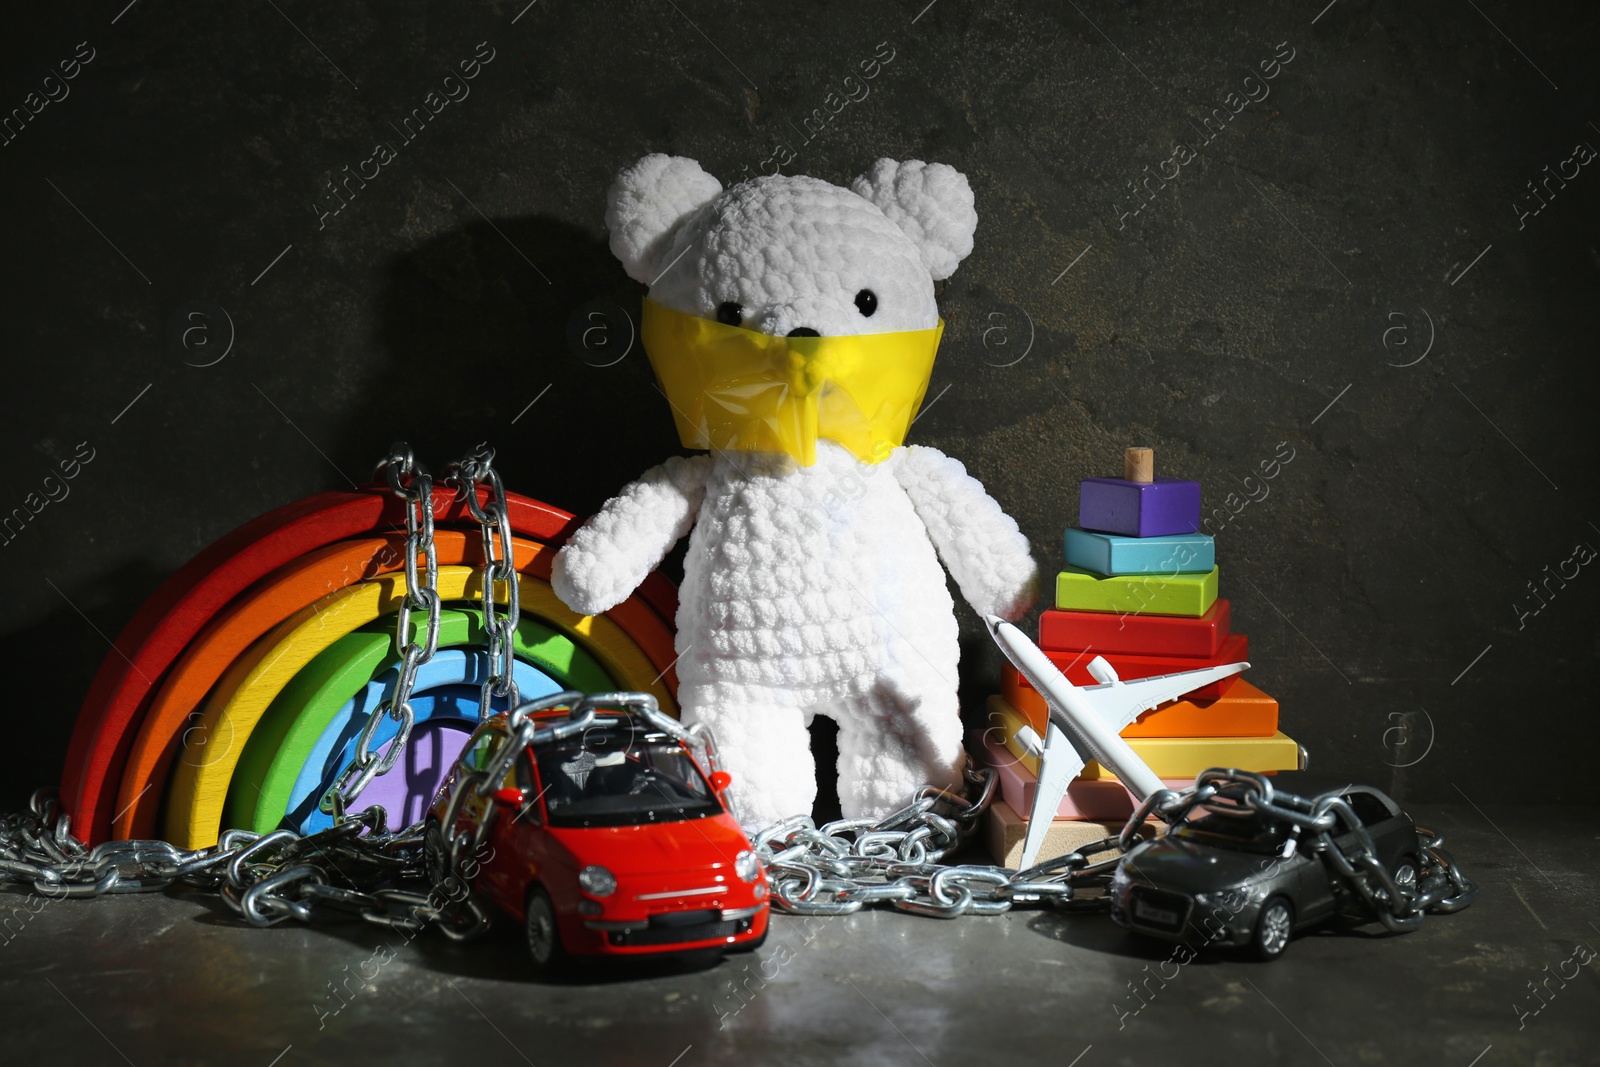 Photo of Stop child abuse. Crochet bear with taped mouth, chain and toys in dark room